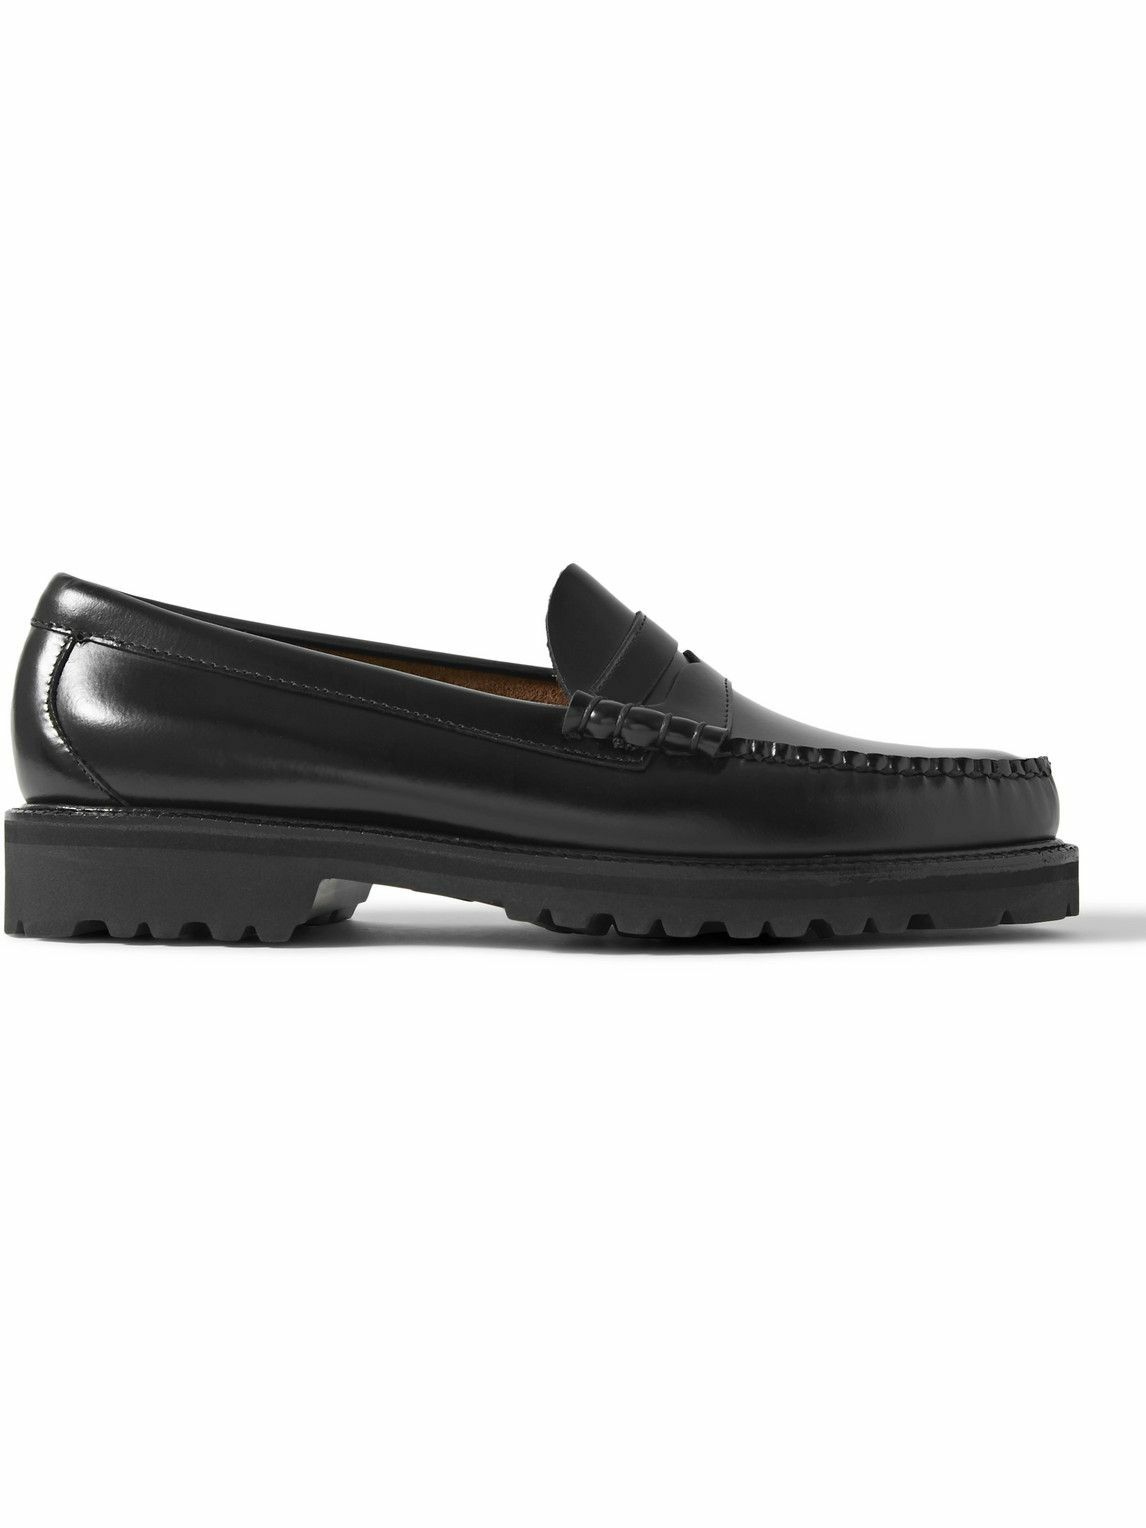 G.H. Bass & Co. - Weejuns 90 Larson Leather Penny Loafers - Black G.H ...